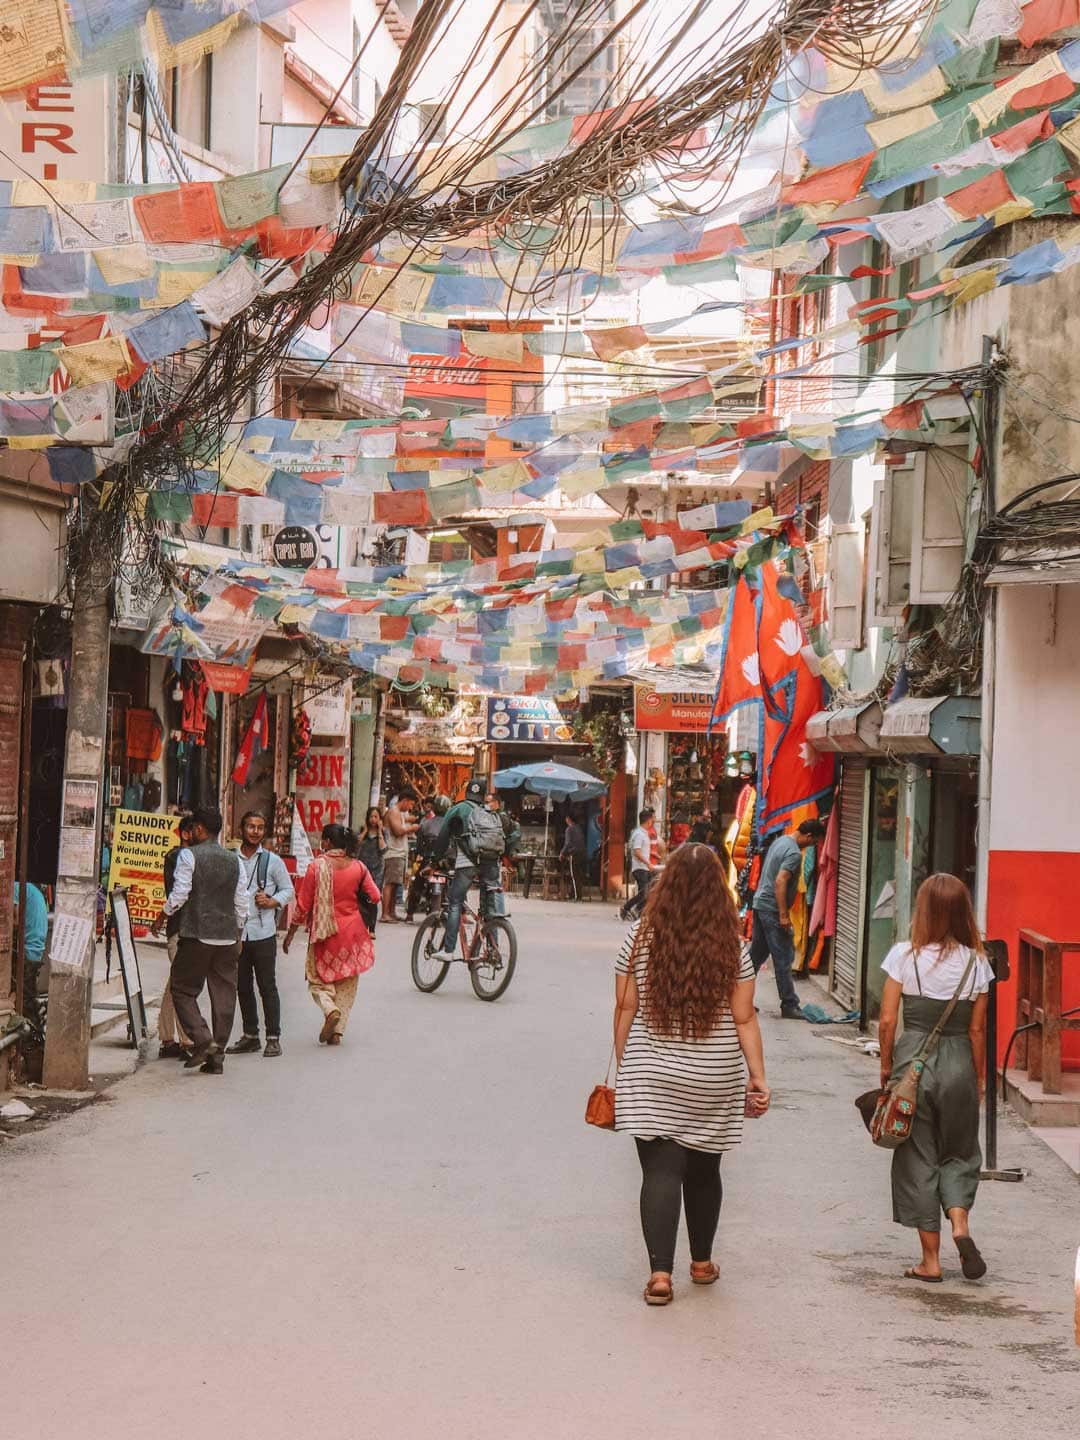 Walking down the colorful streets of Kathmandu, one of the things I miss about travelling